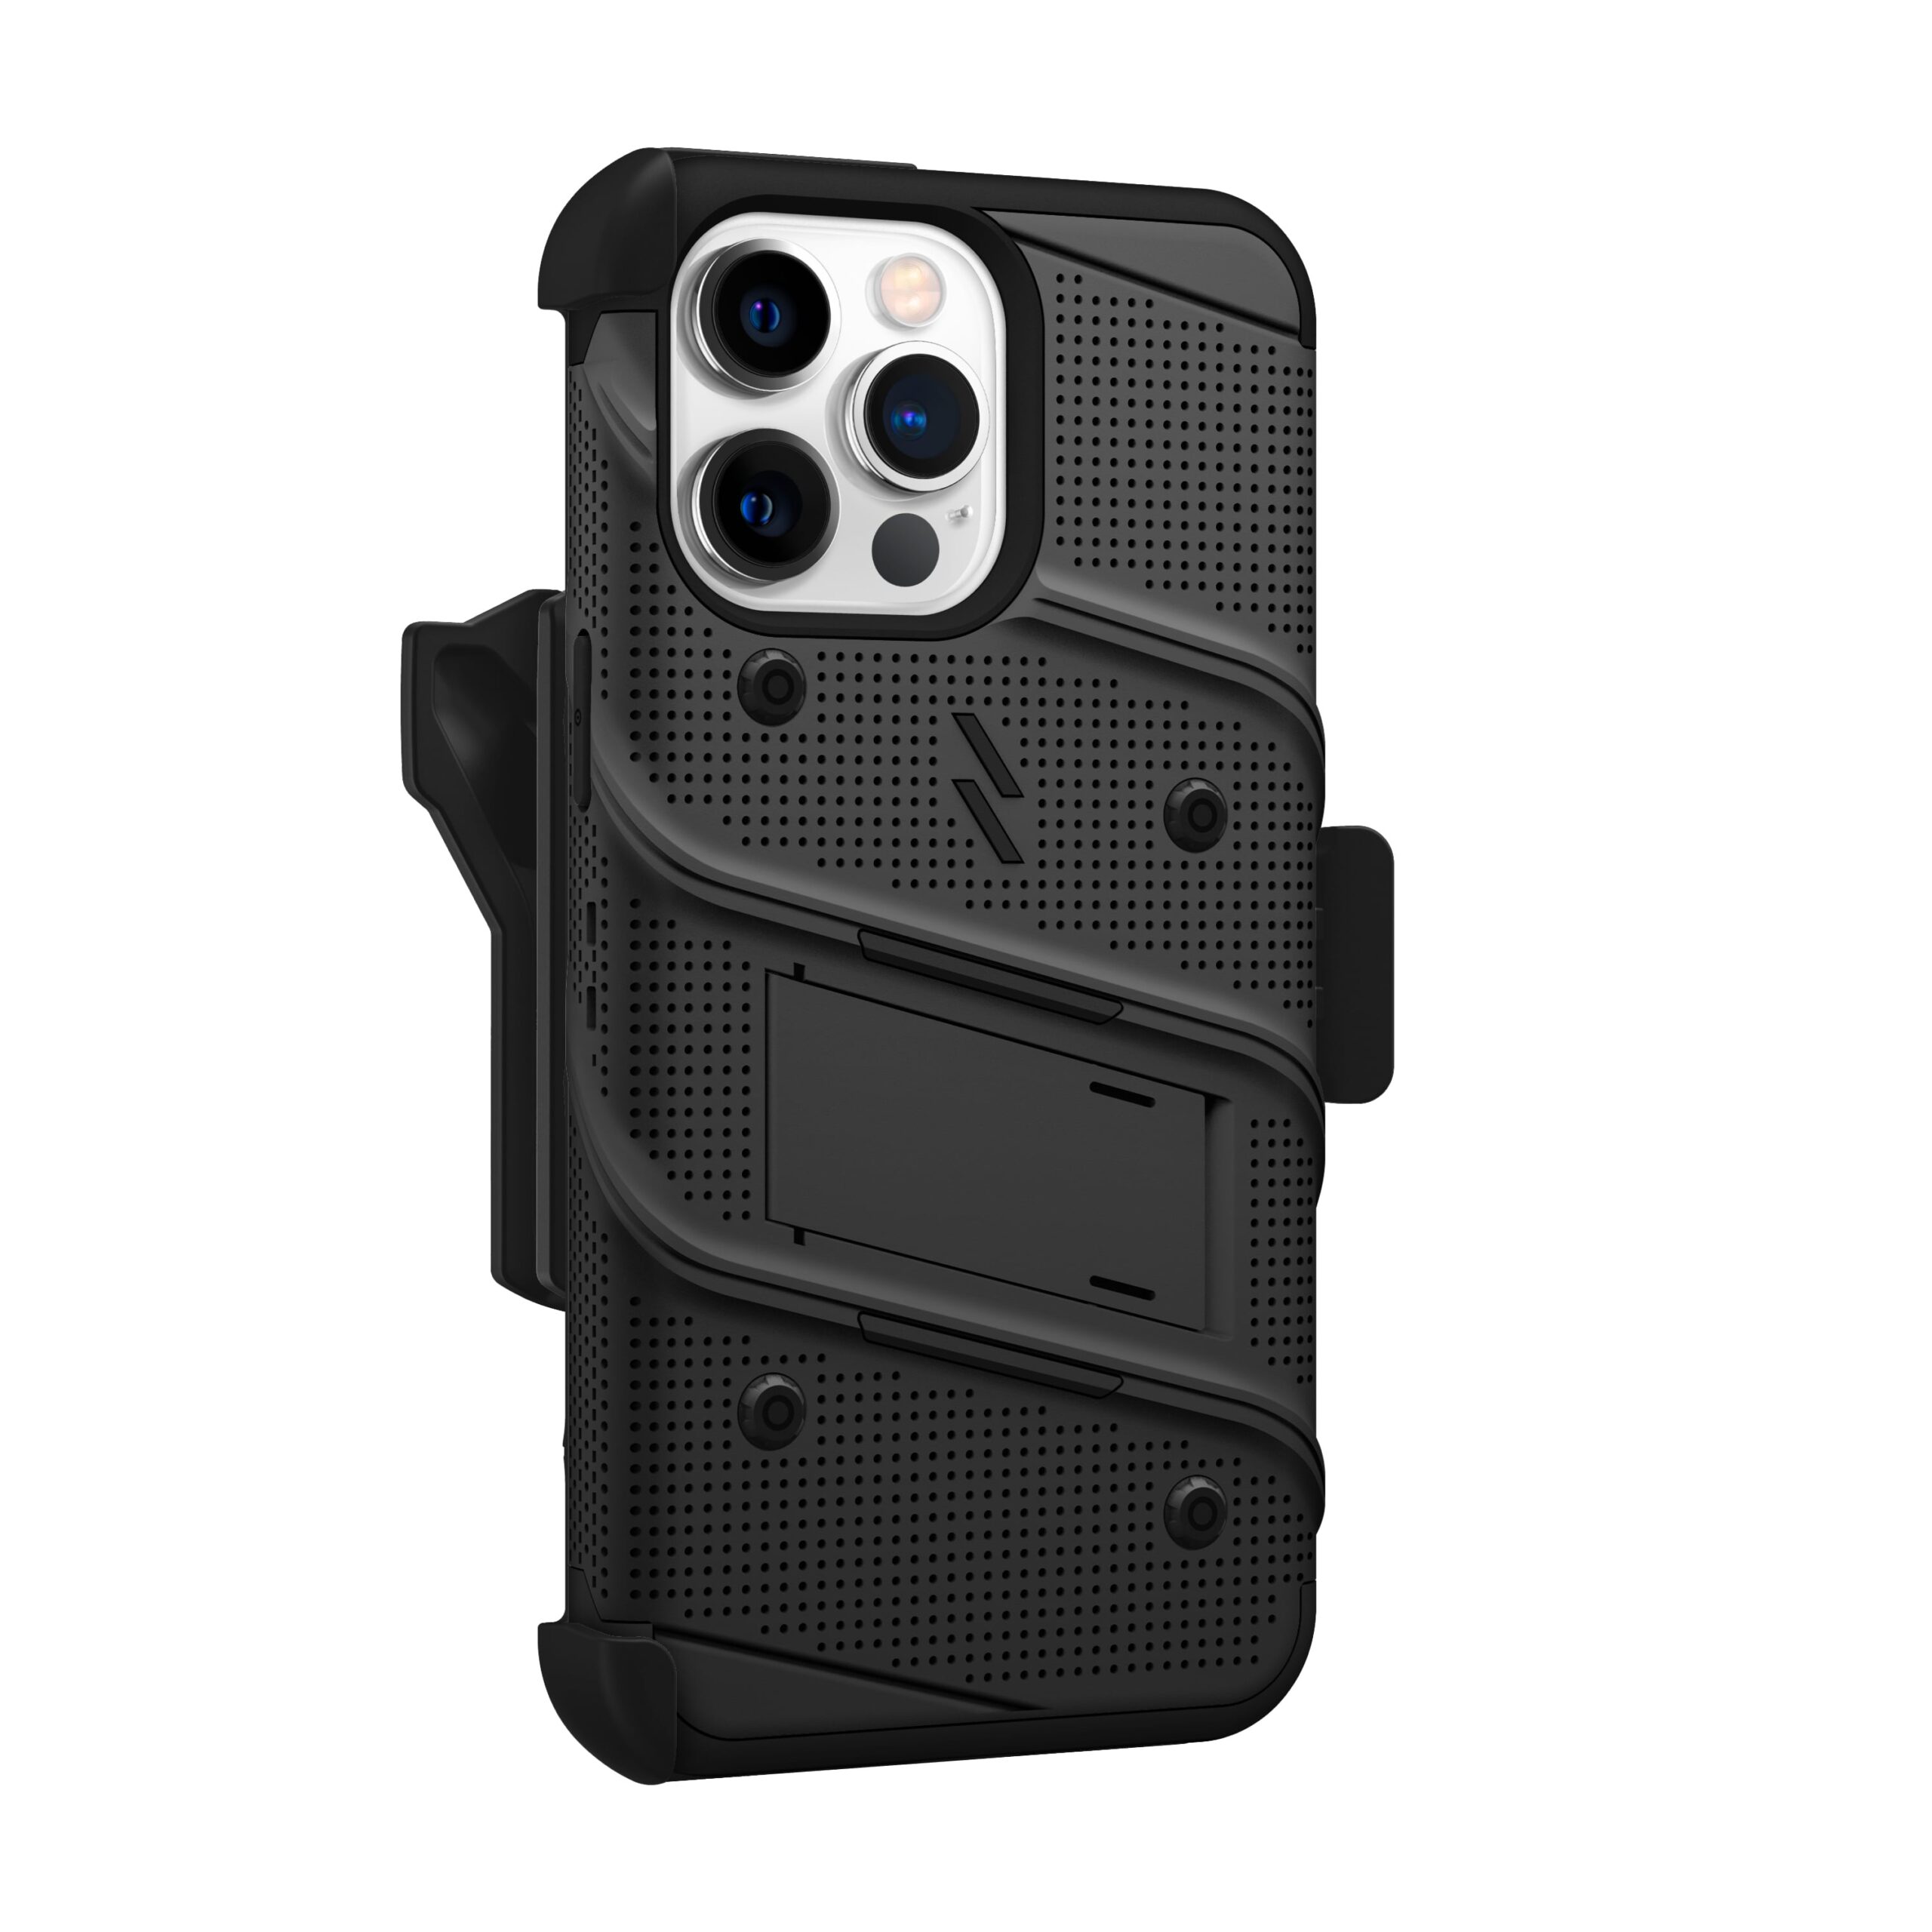 Zizo Bolt iPhone 15 Pro Max Holster Case with Tempered Glass, Kickstand & Lanyard "Protective & Light Weight" - Black